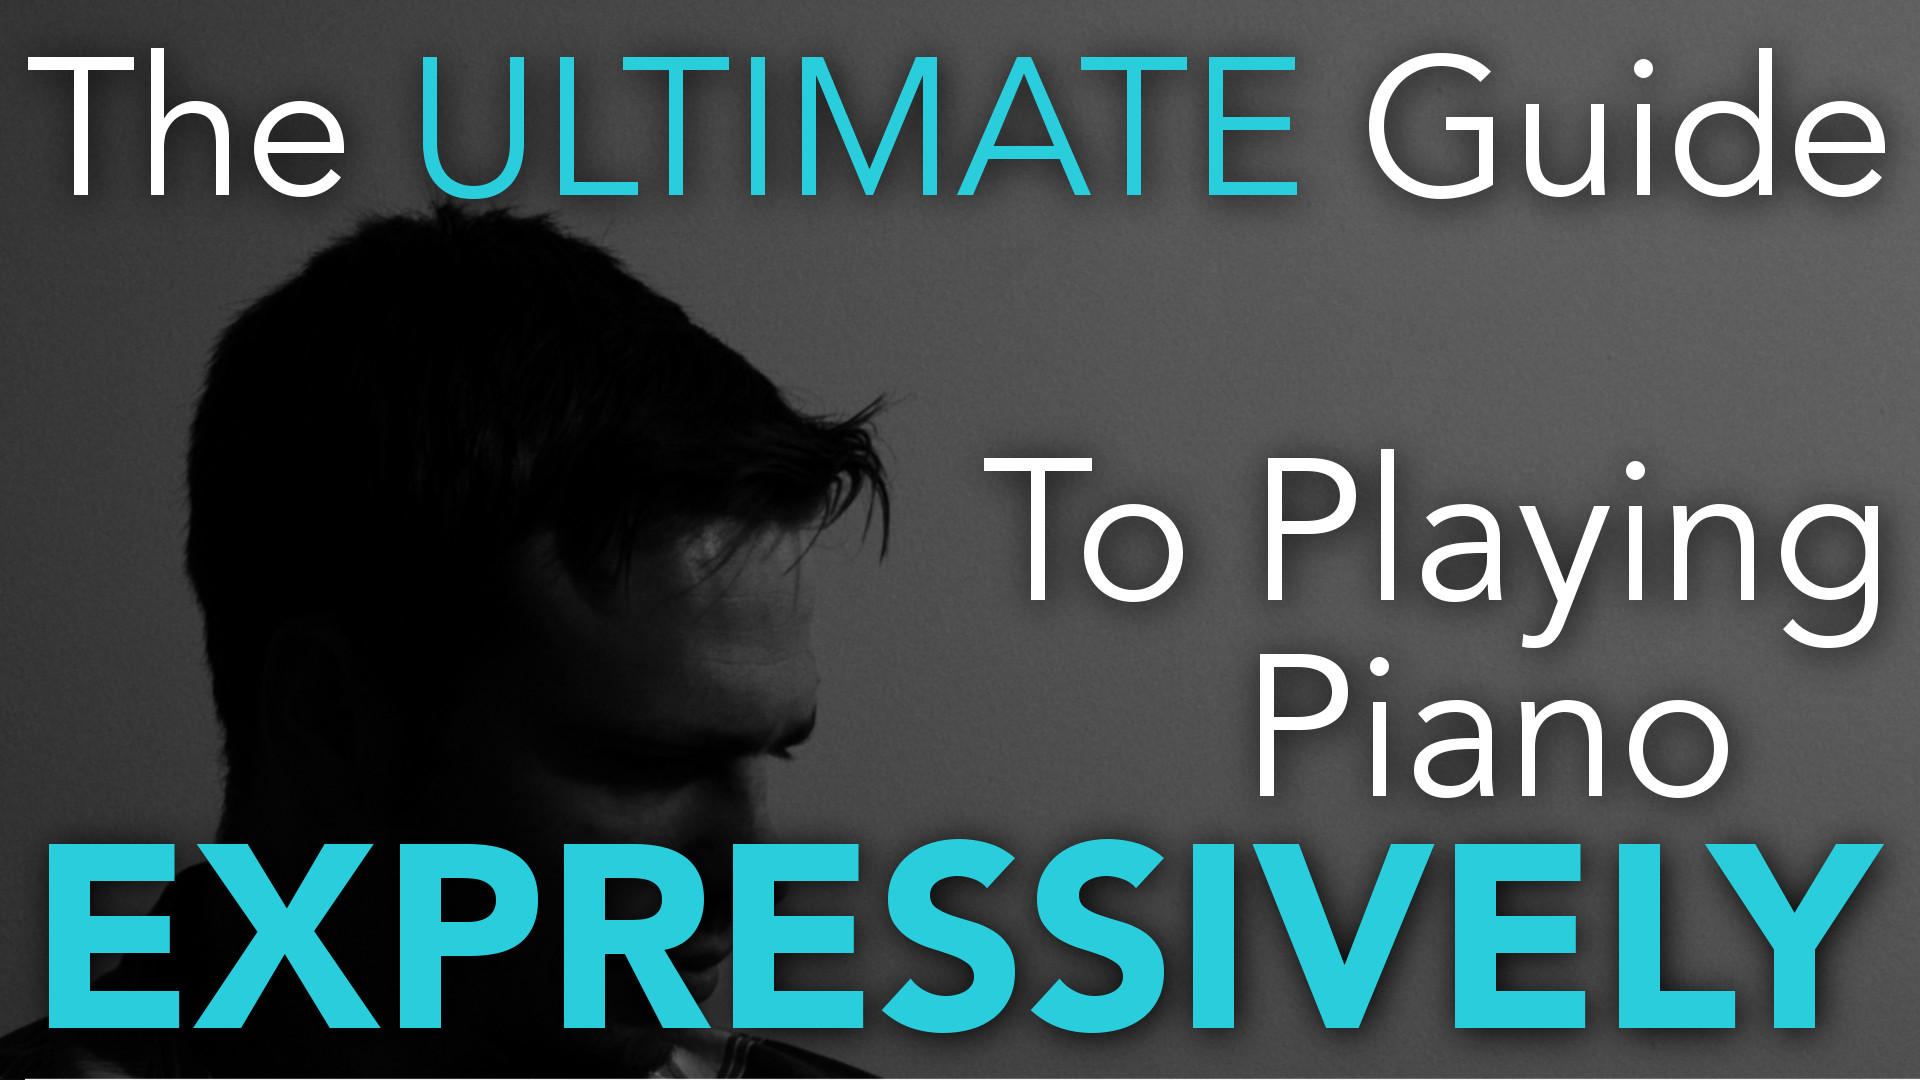 The ultimate guide to playing piano expressively Thumbnail